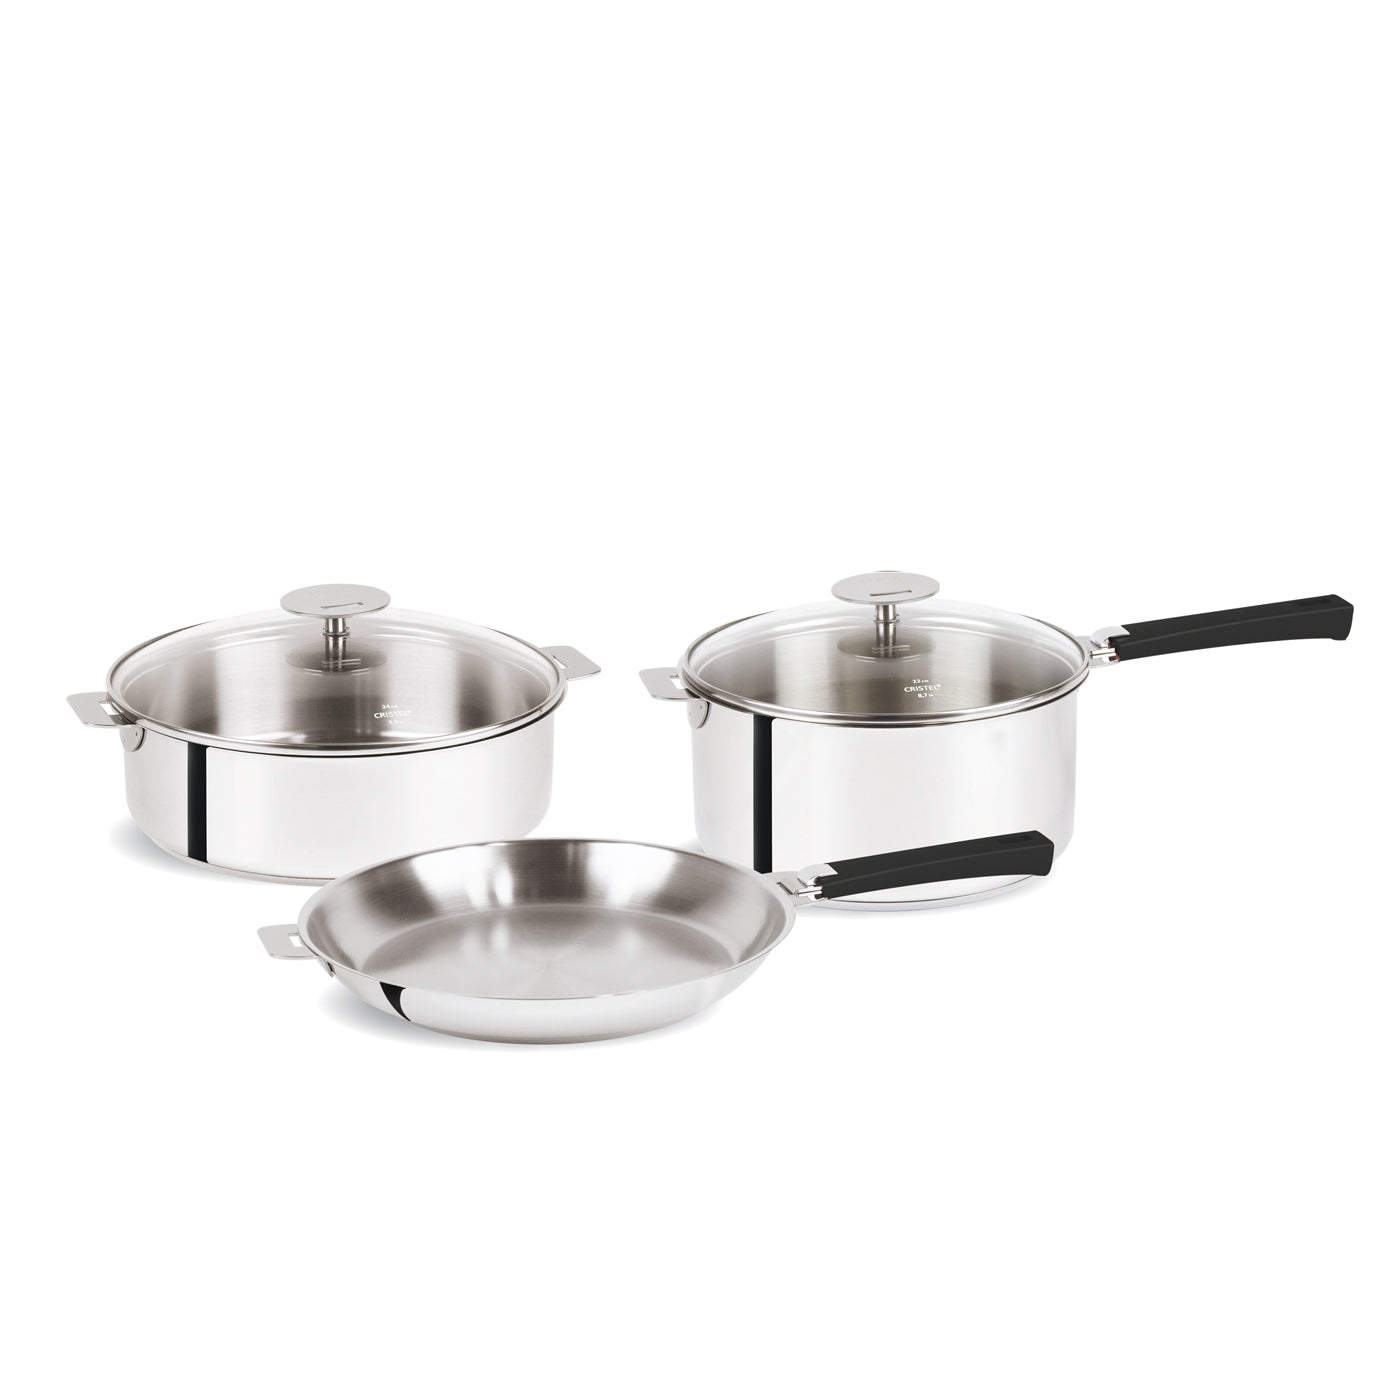 Pots and Pans Set, 10 Piece Stainless Steel Kitchen Removable